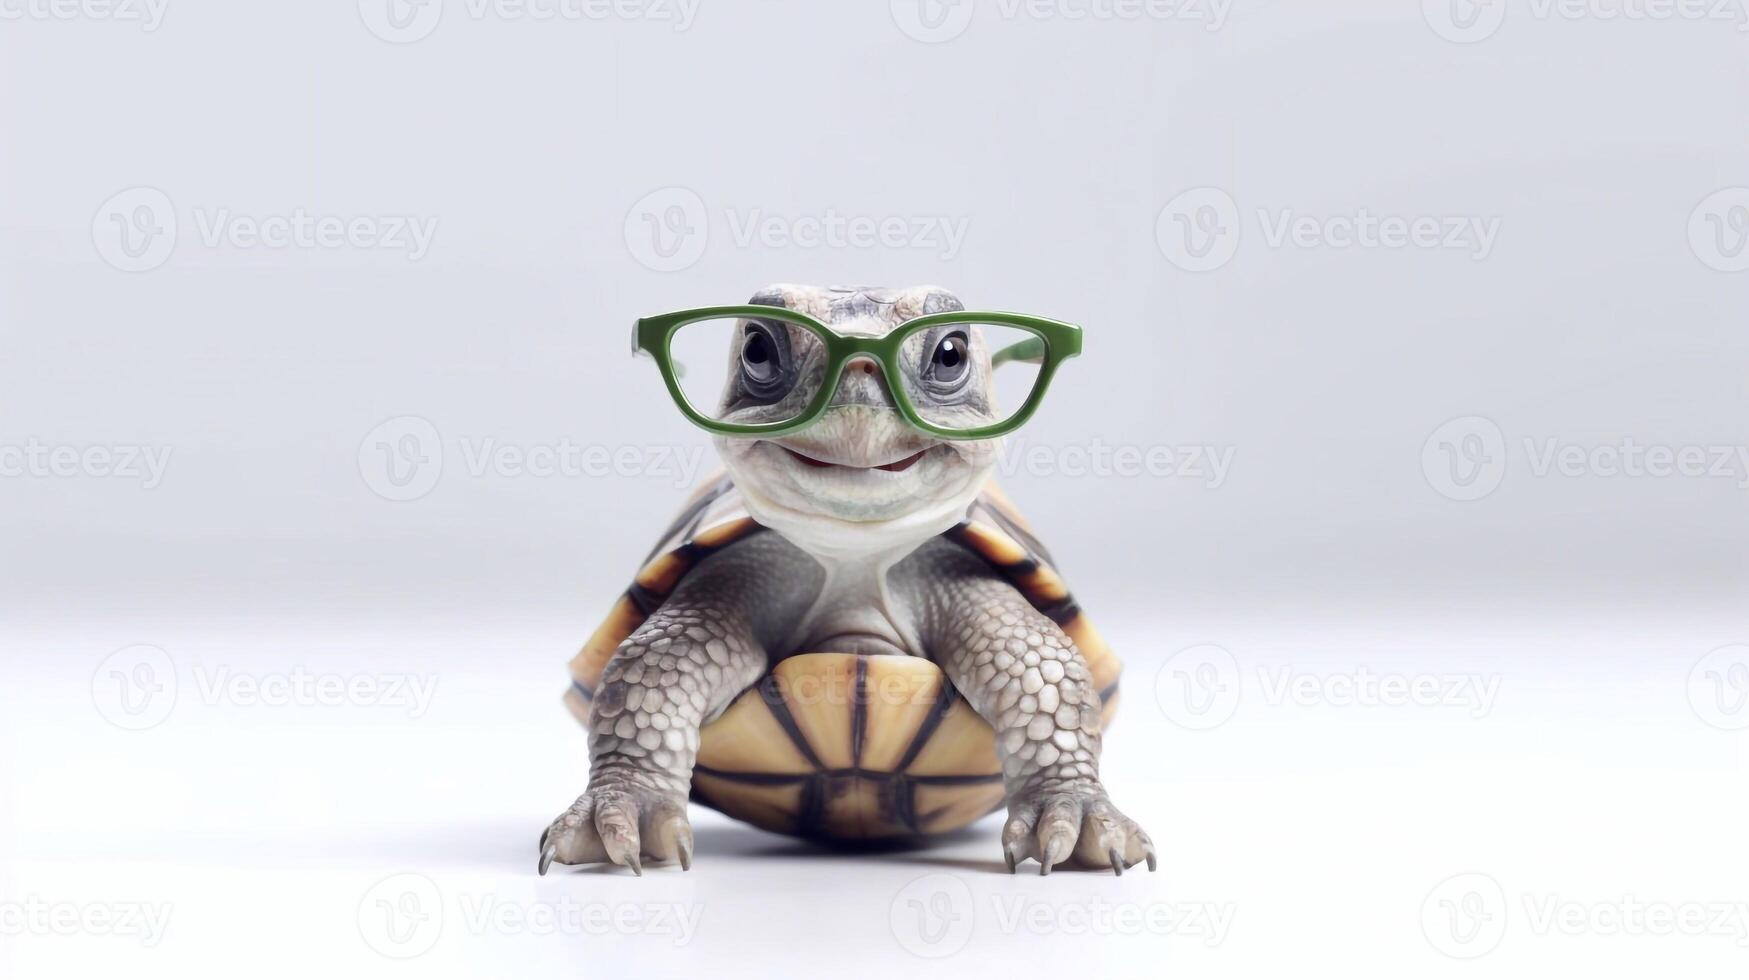 A tortoise wearing glasses is shown with a white background. - photo